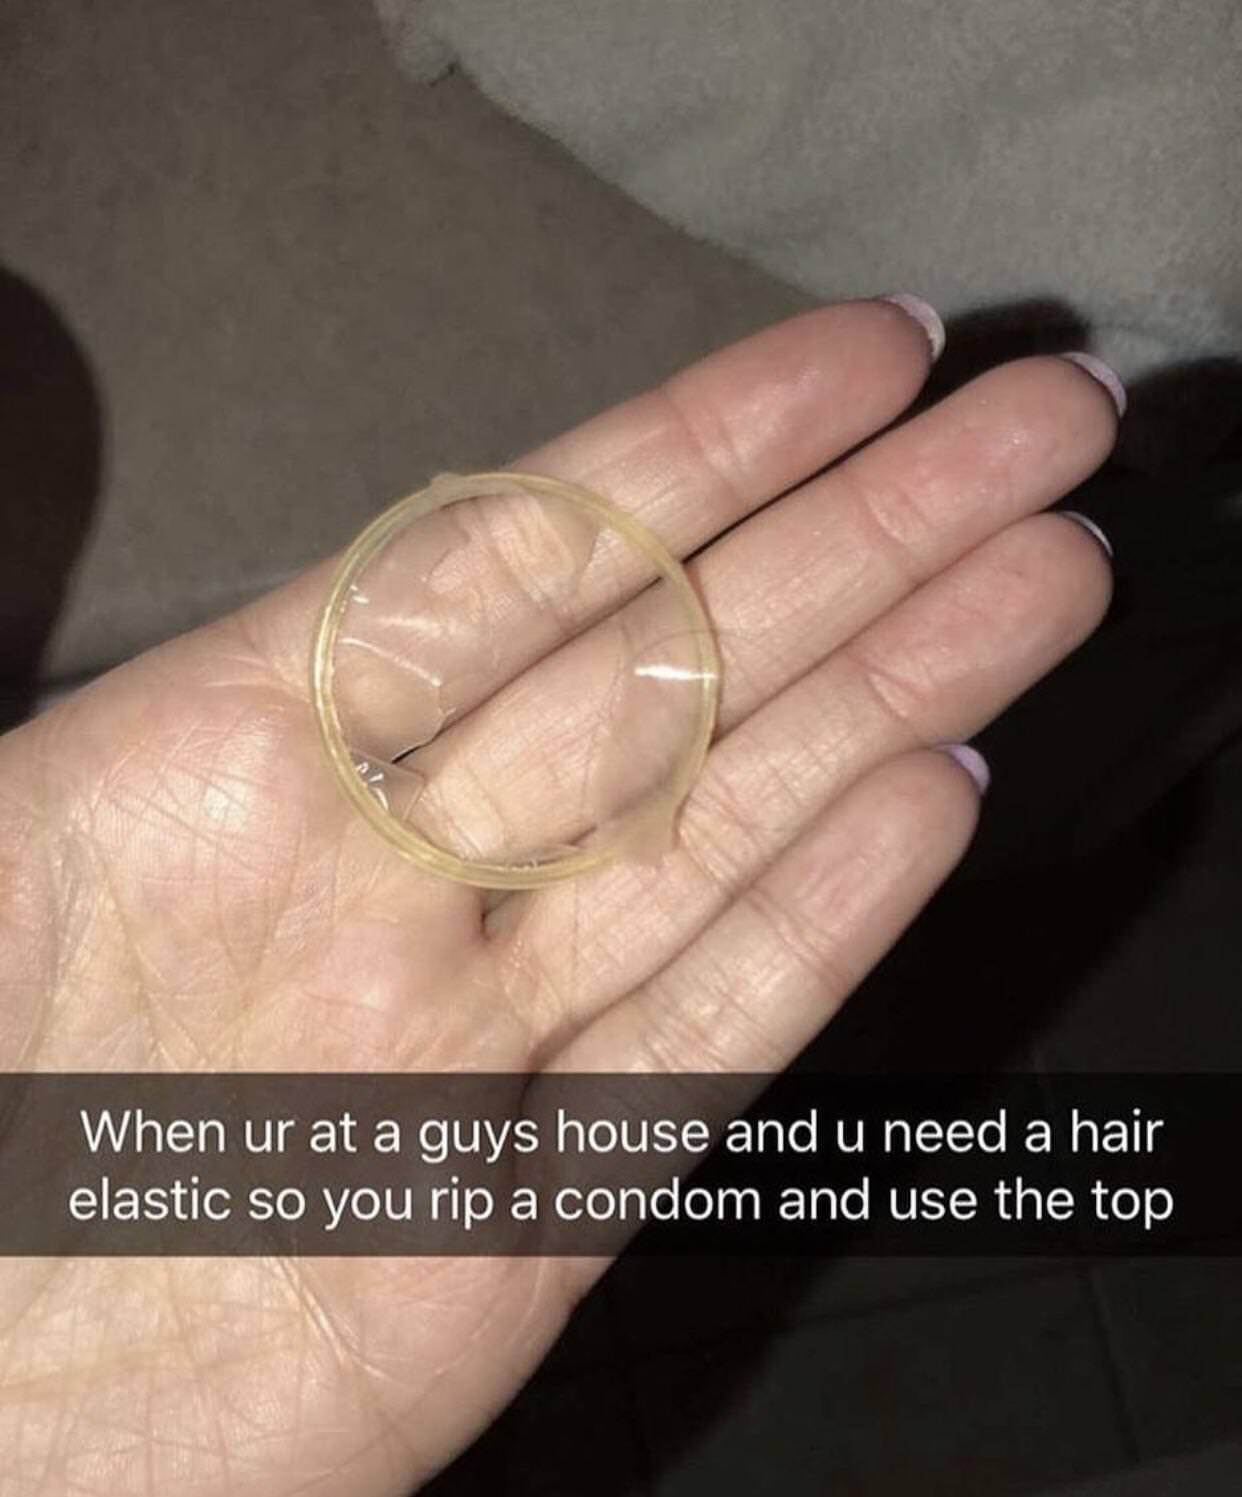 r trashy reddit - When ur at a guys house and u need a hair elastic so you rip a condom and use the top